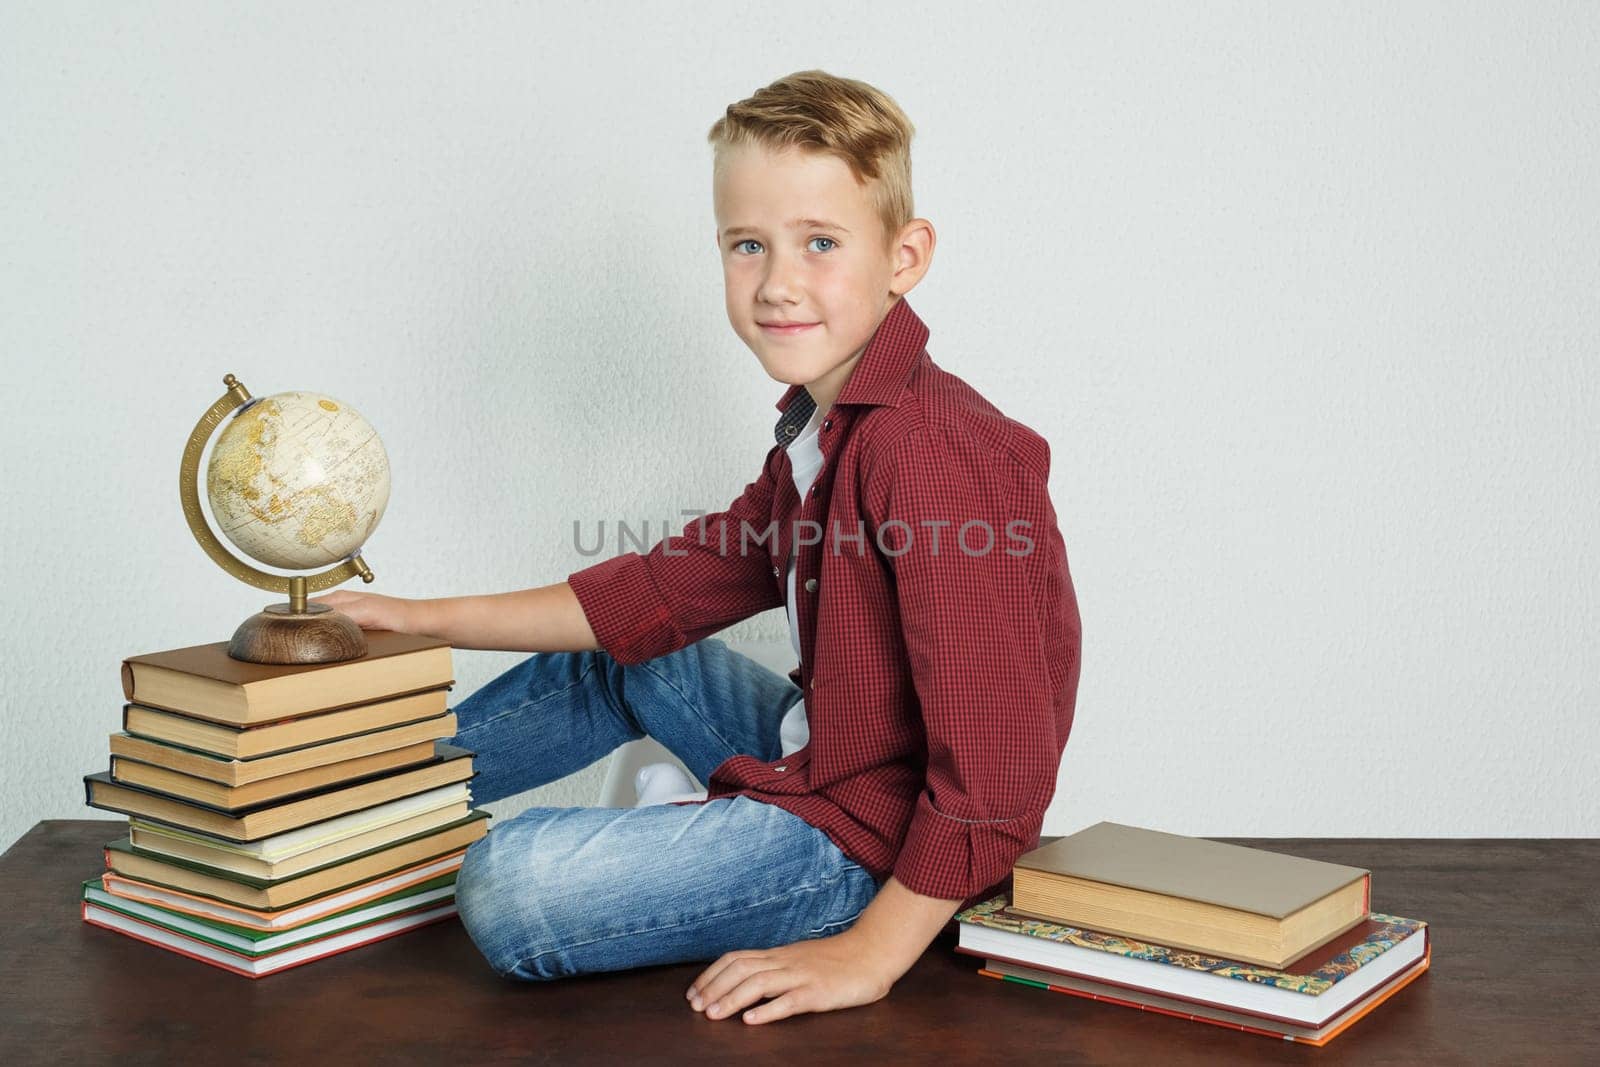 A schoolboy sits at a desk near books and holds a globe with his hand. Education concept